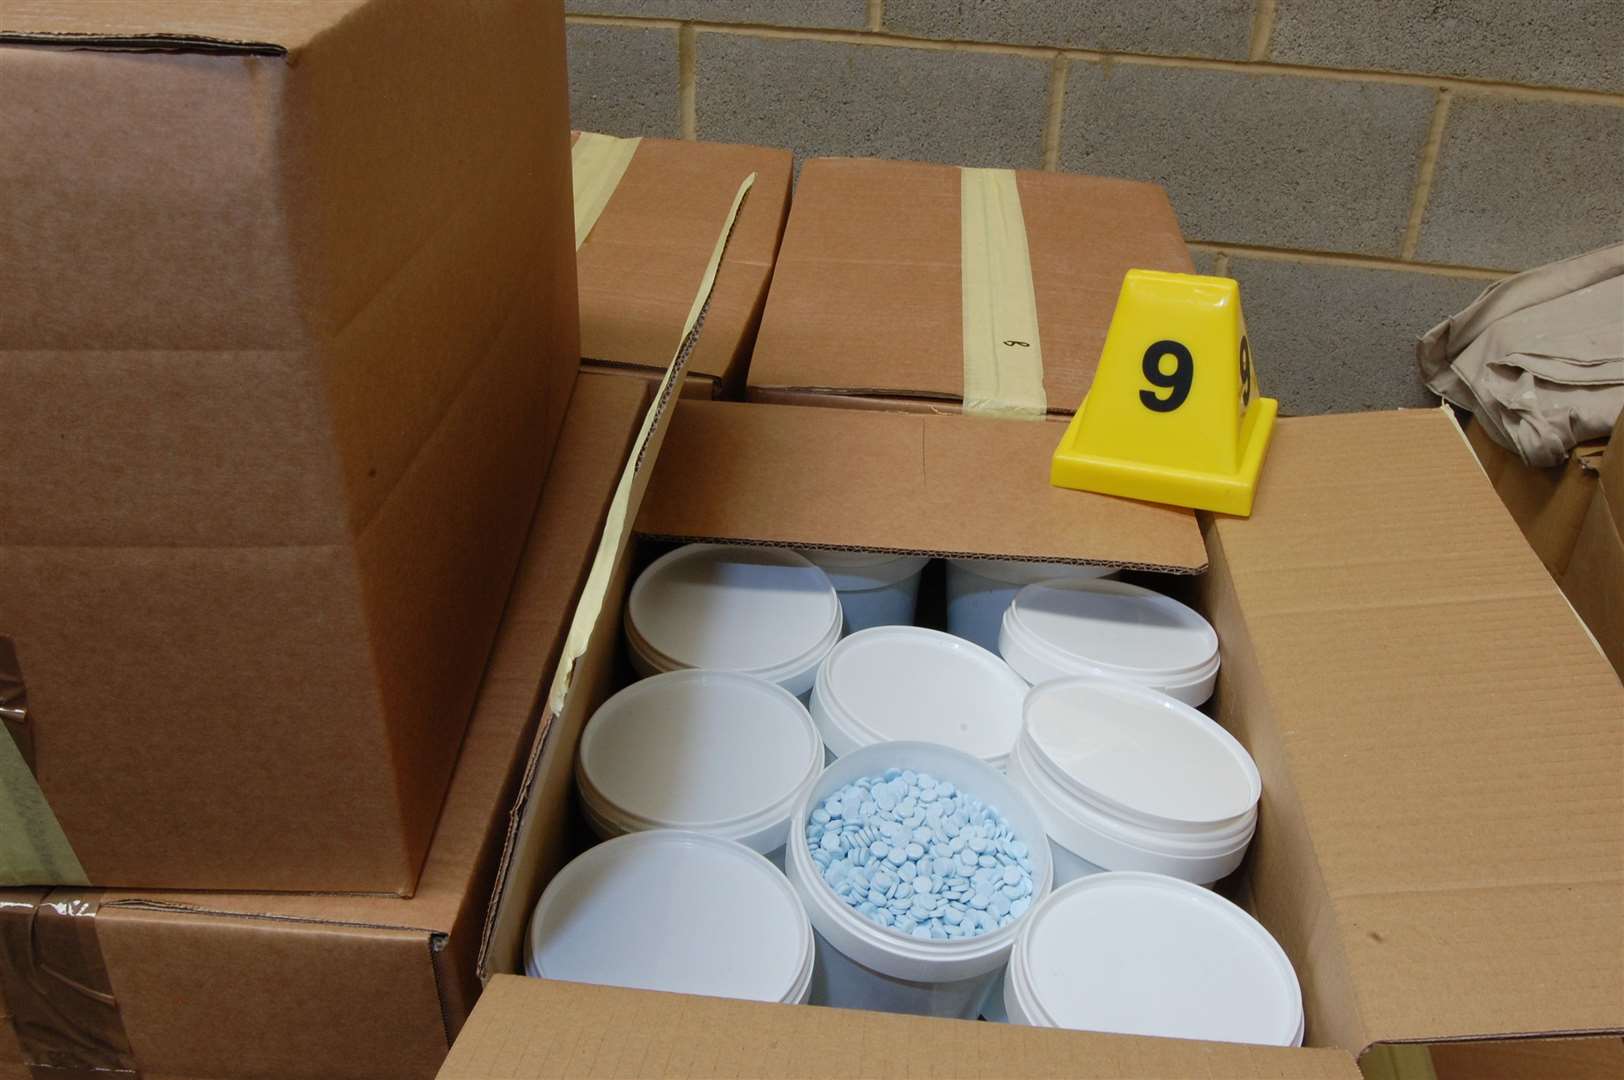 The pill factory in Rochester raided earlier this year